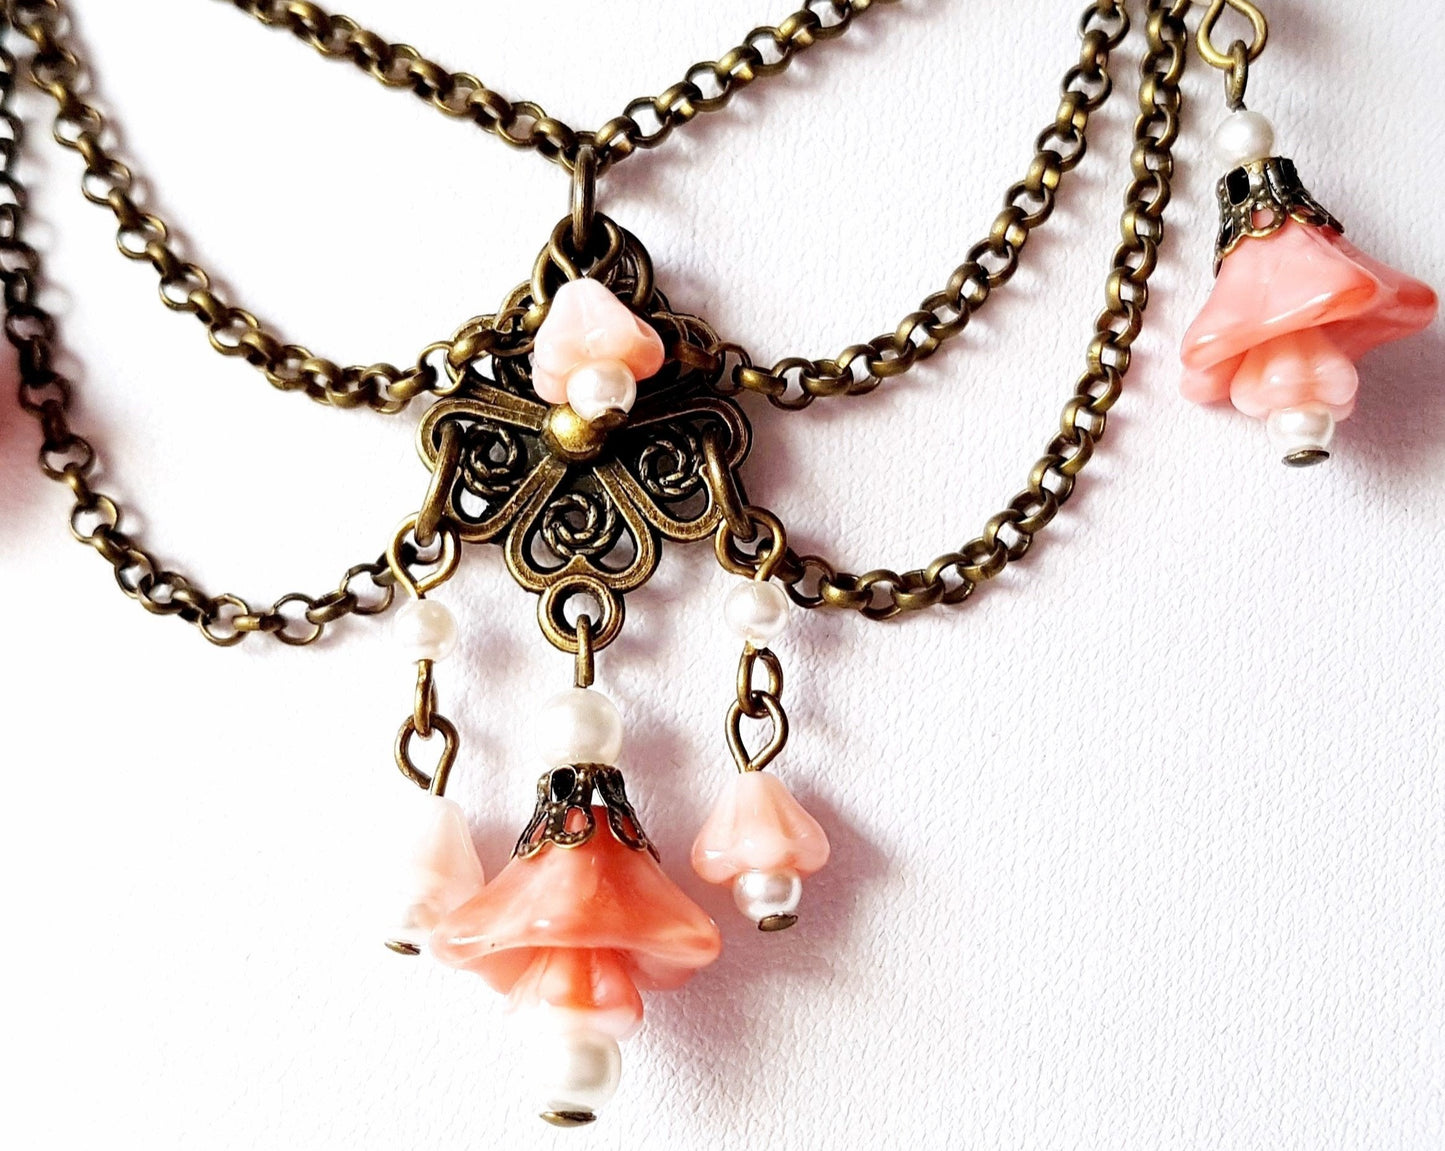 Victorian Style Rose Pink Flower Festoon Necklace and Earring Set with peach pink flower dangles and swags of antiqued brass chain.